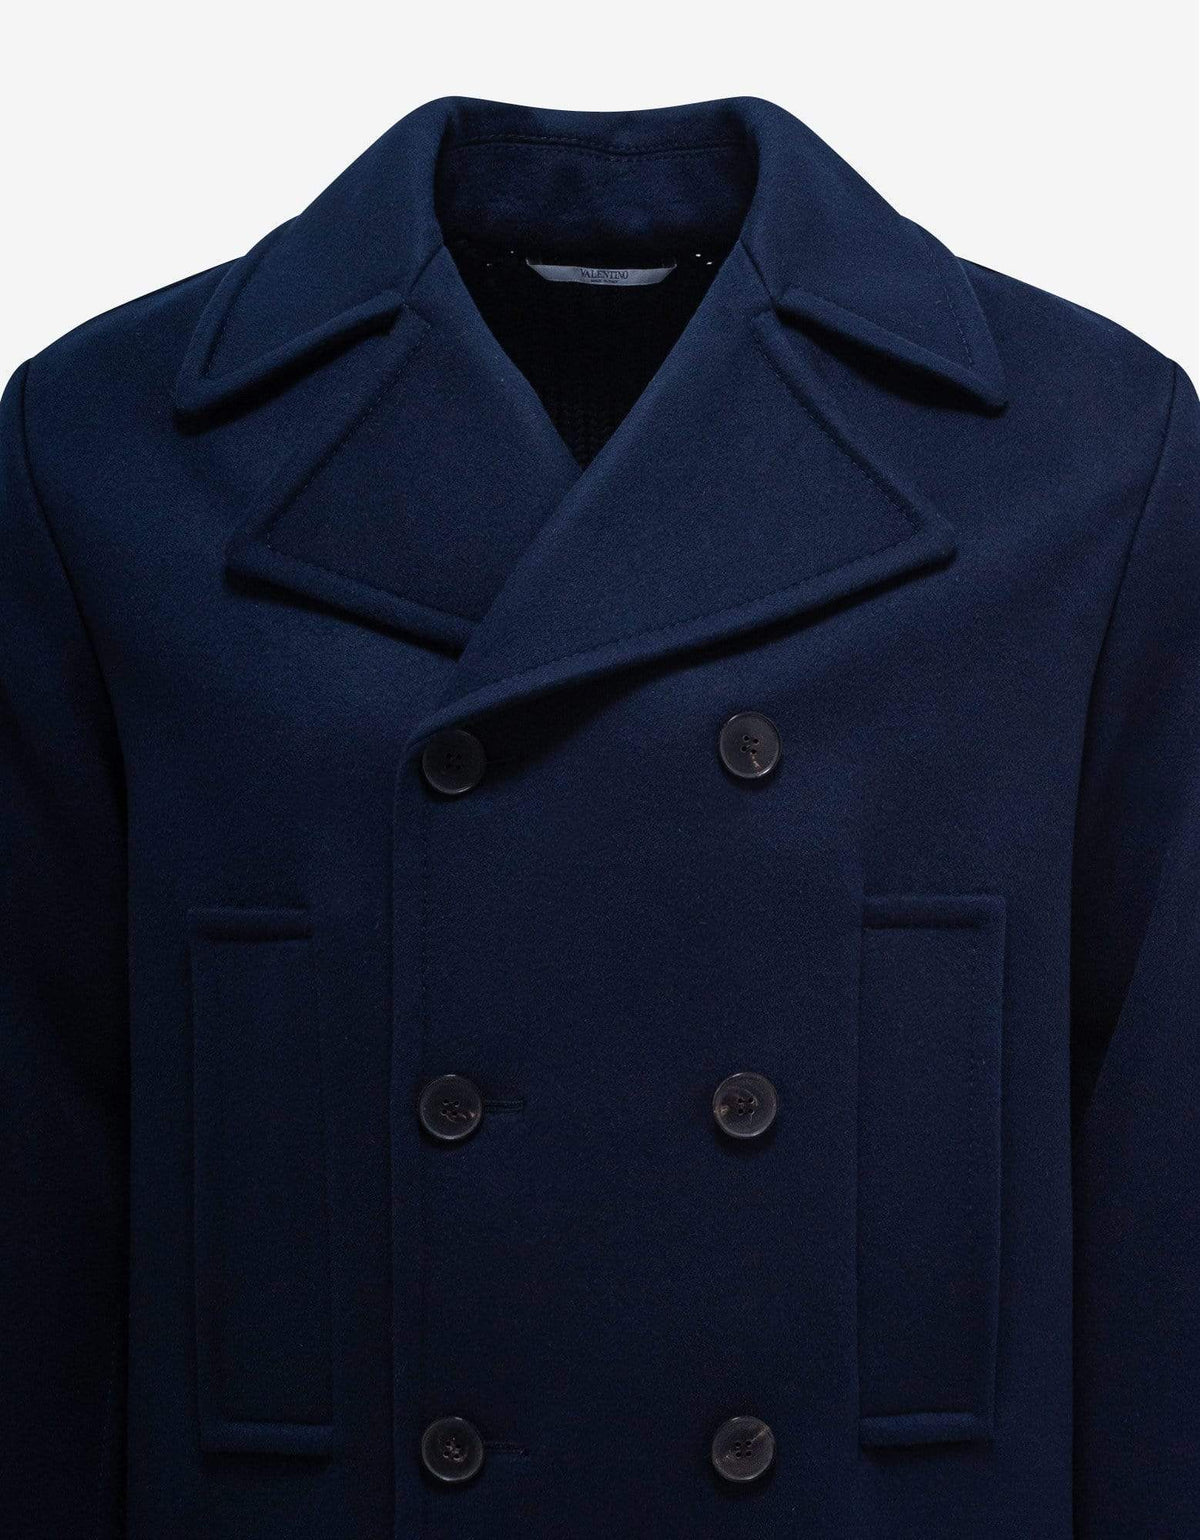 Valentino Navy Blue Double-Breasted Wool Jacket